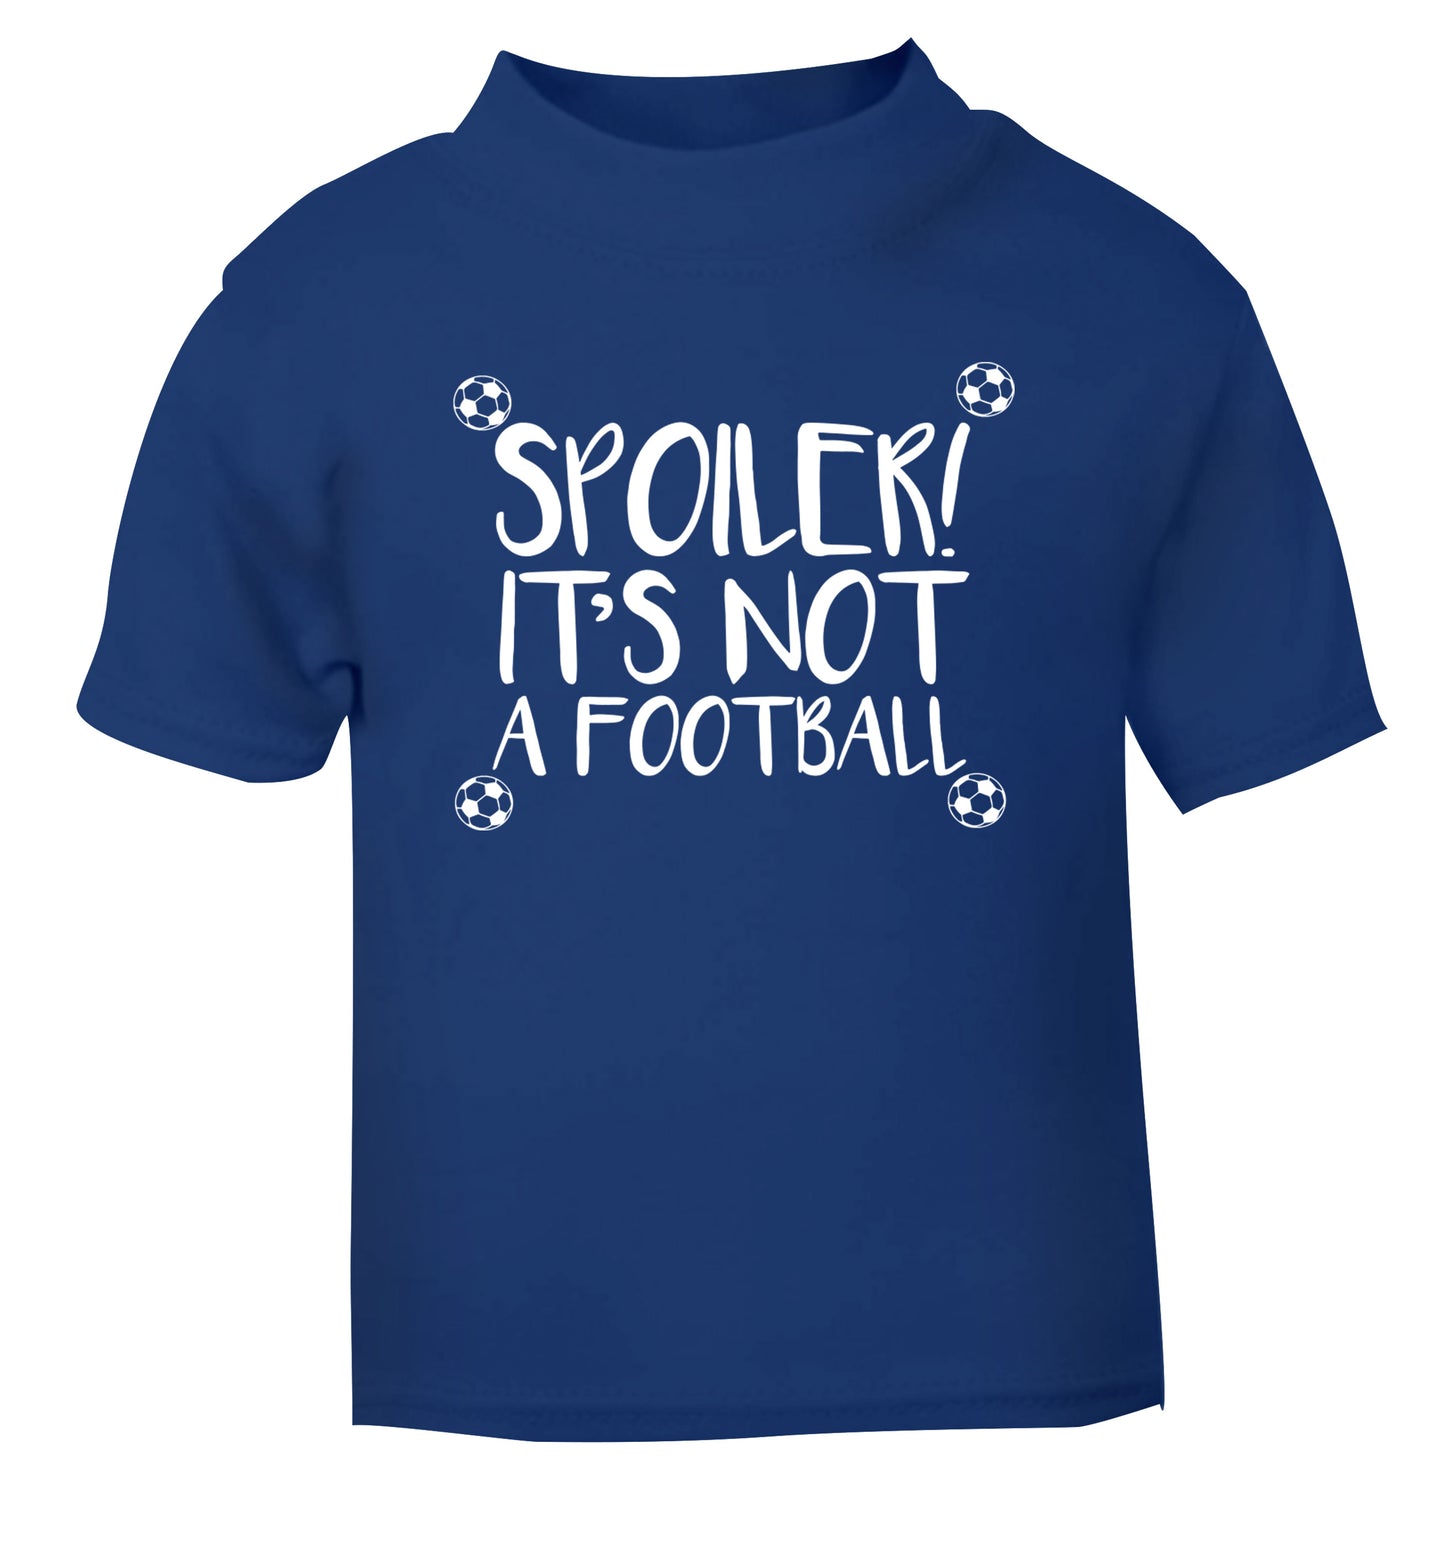 Spoiler it's not a football blue Baby Toddler Tshirt 2 Years